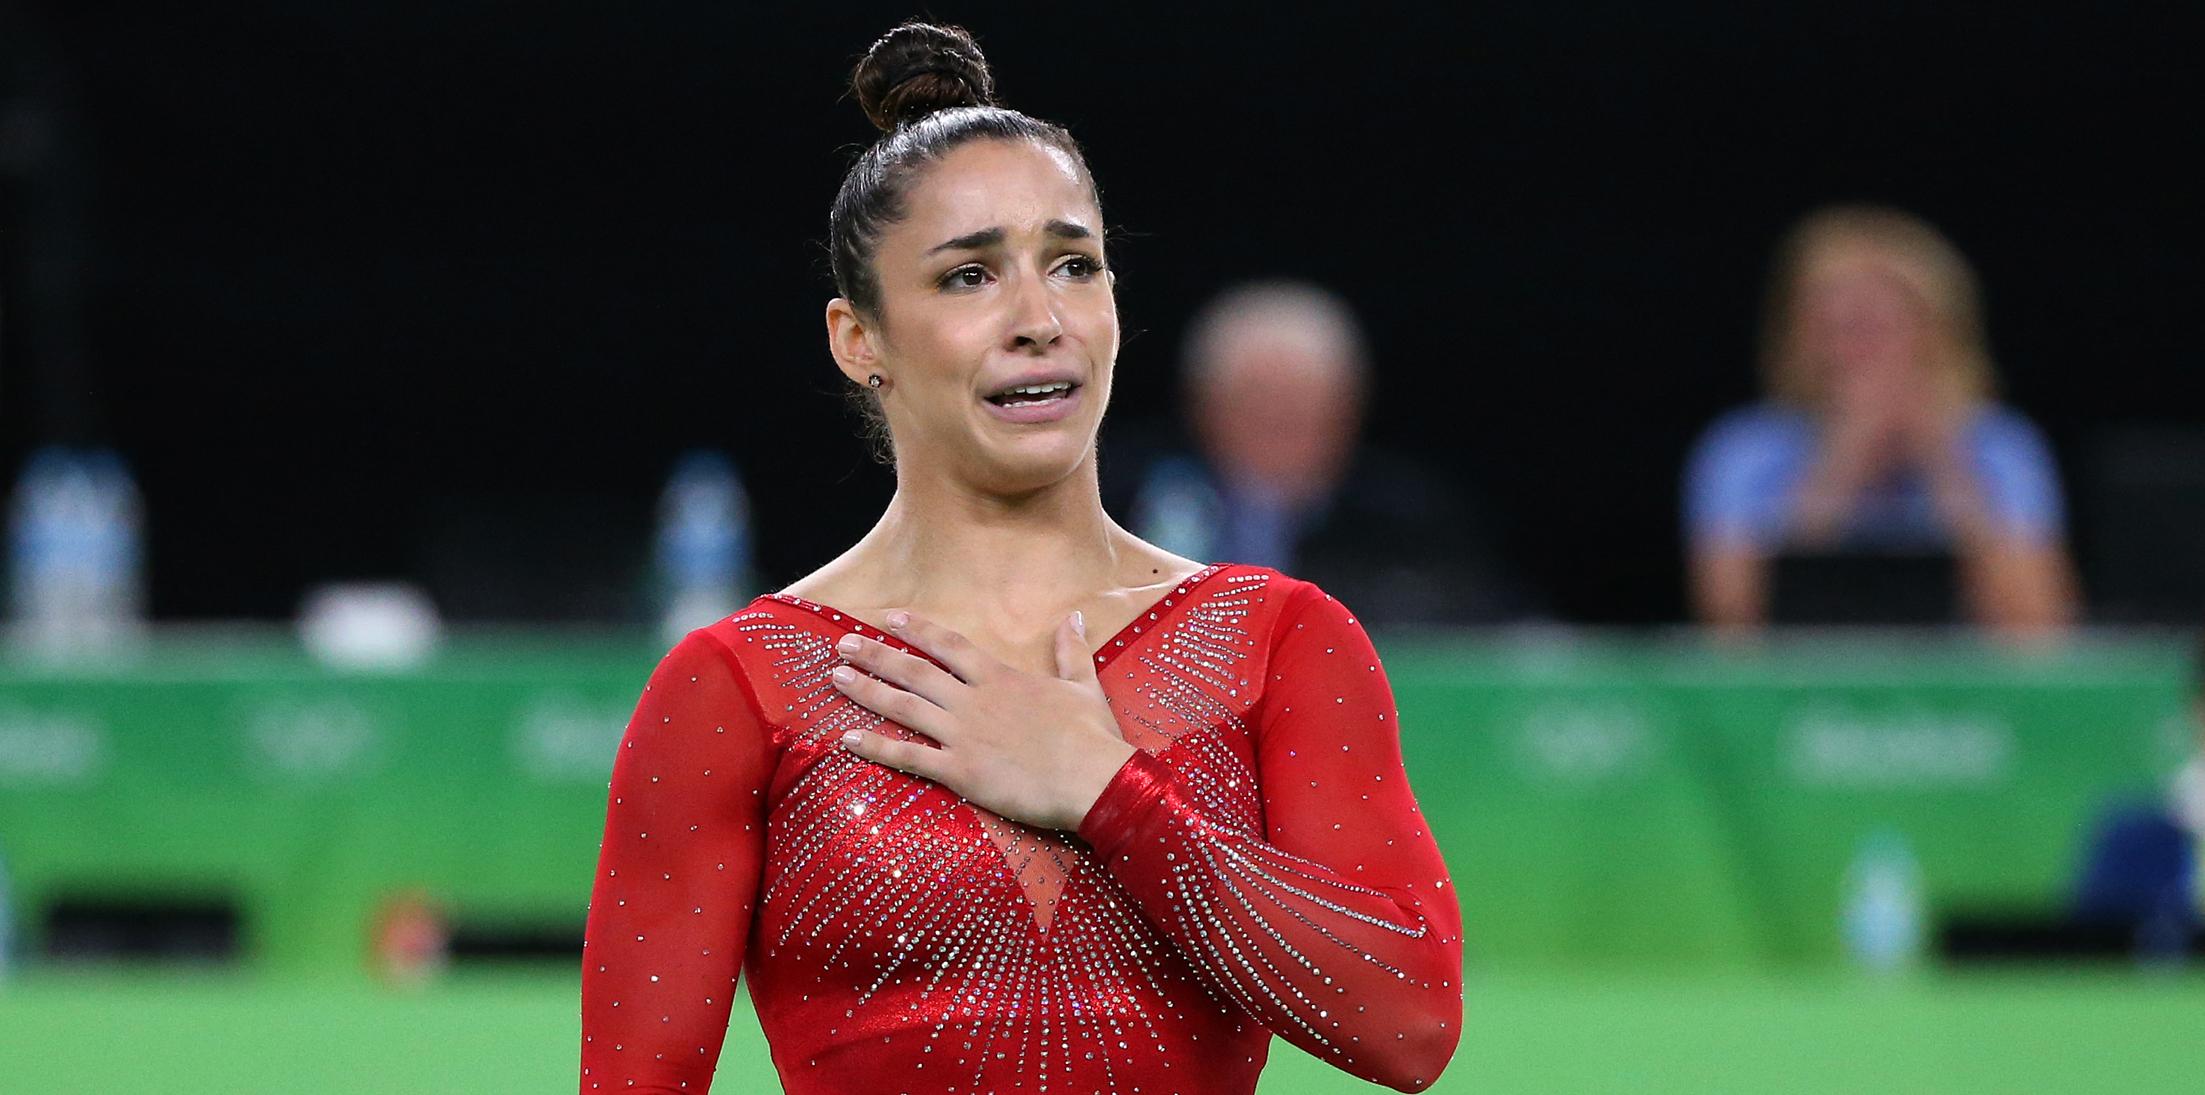 Aly Raisman says she was sexually abused by team doctor 